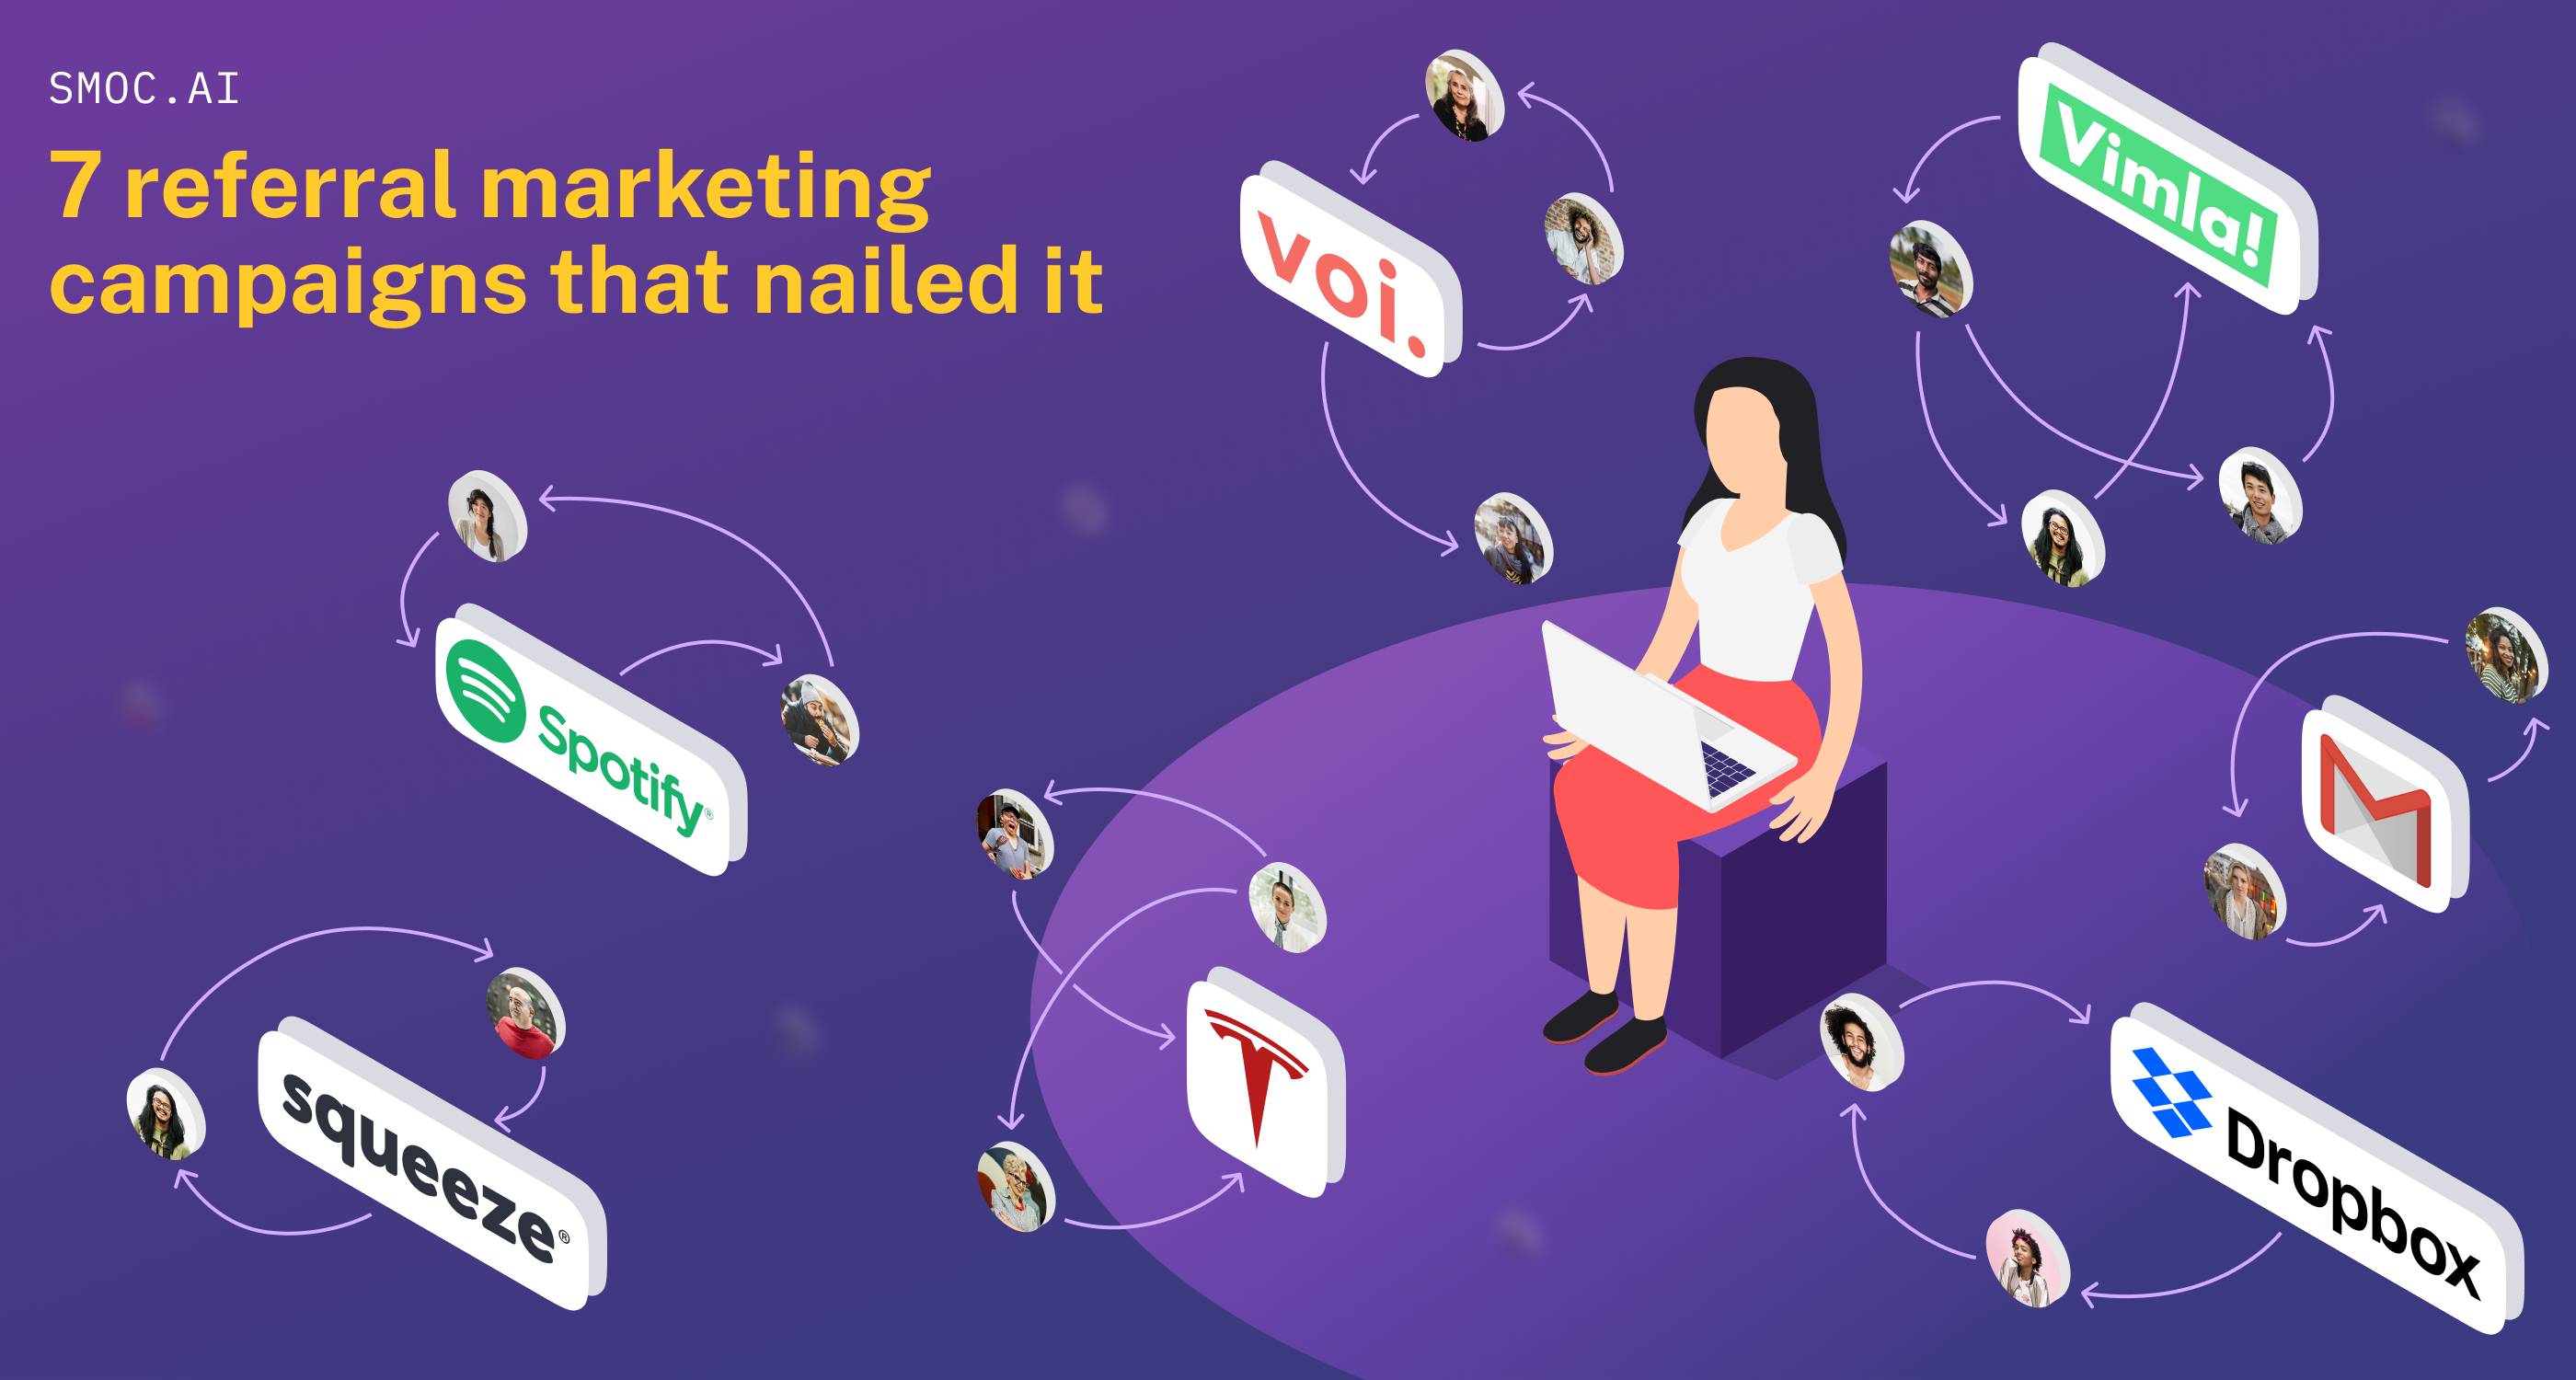 7 referral marketing campaigns that nailed it